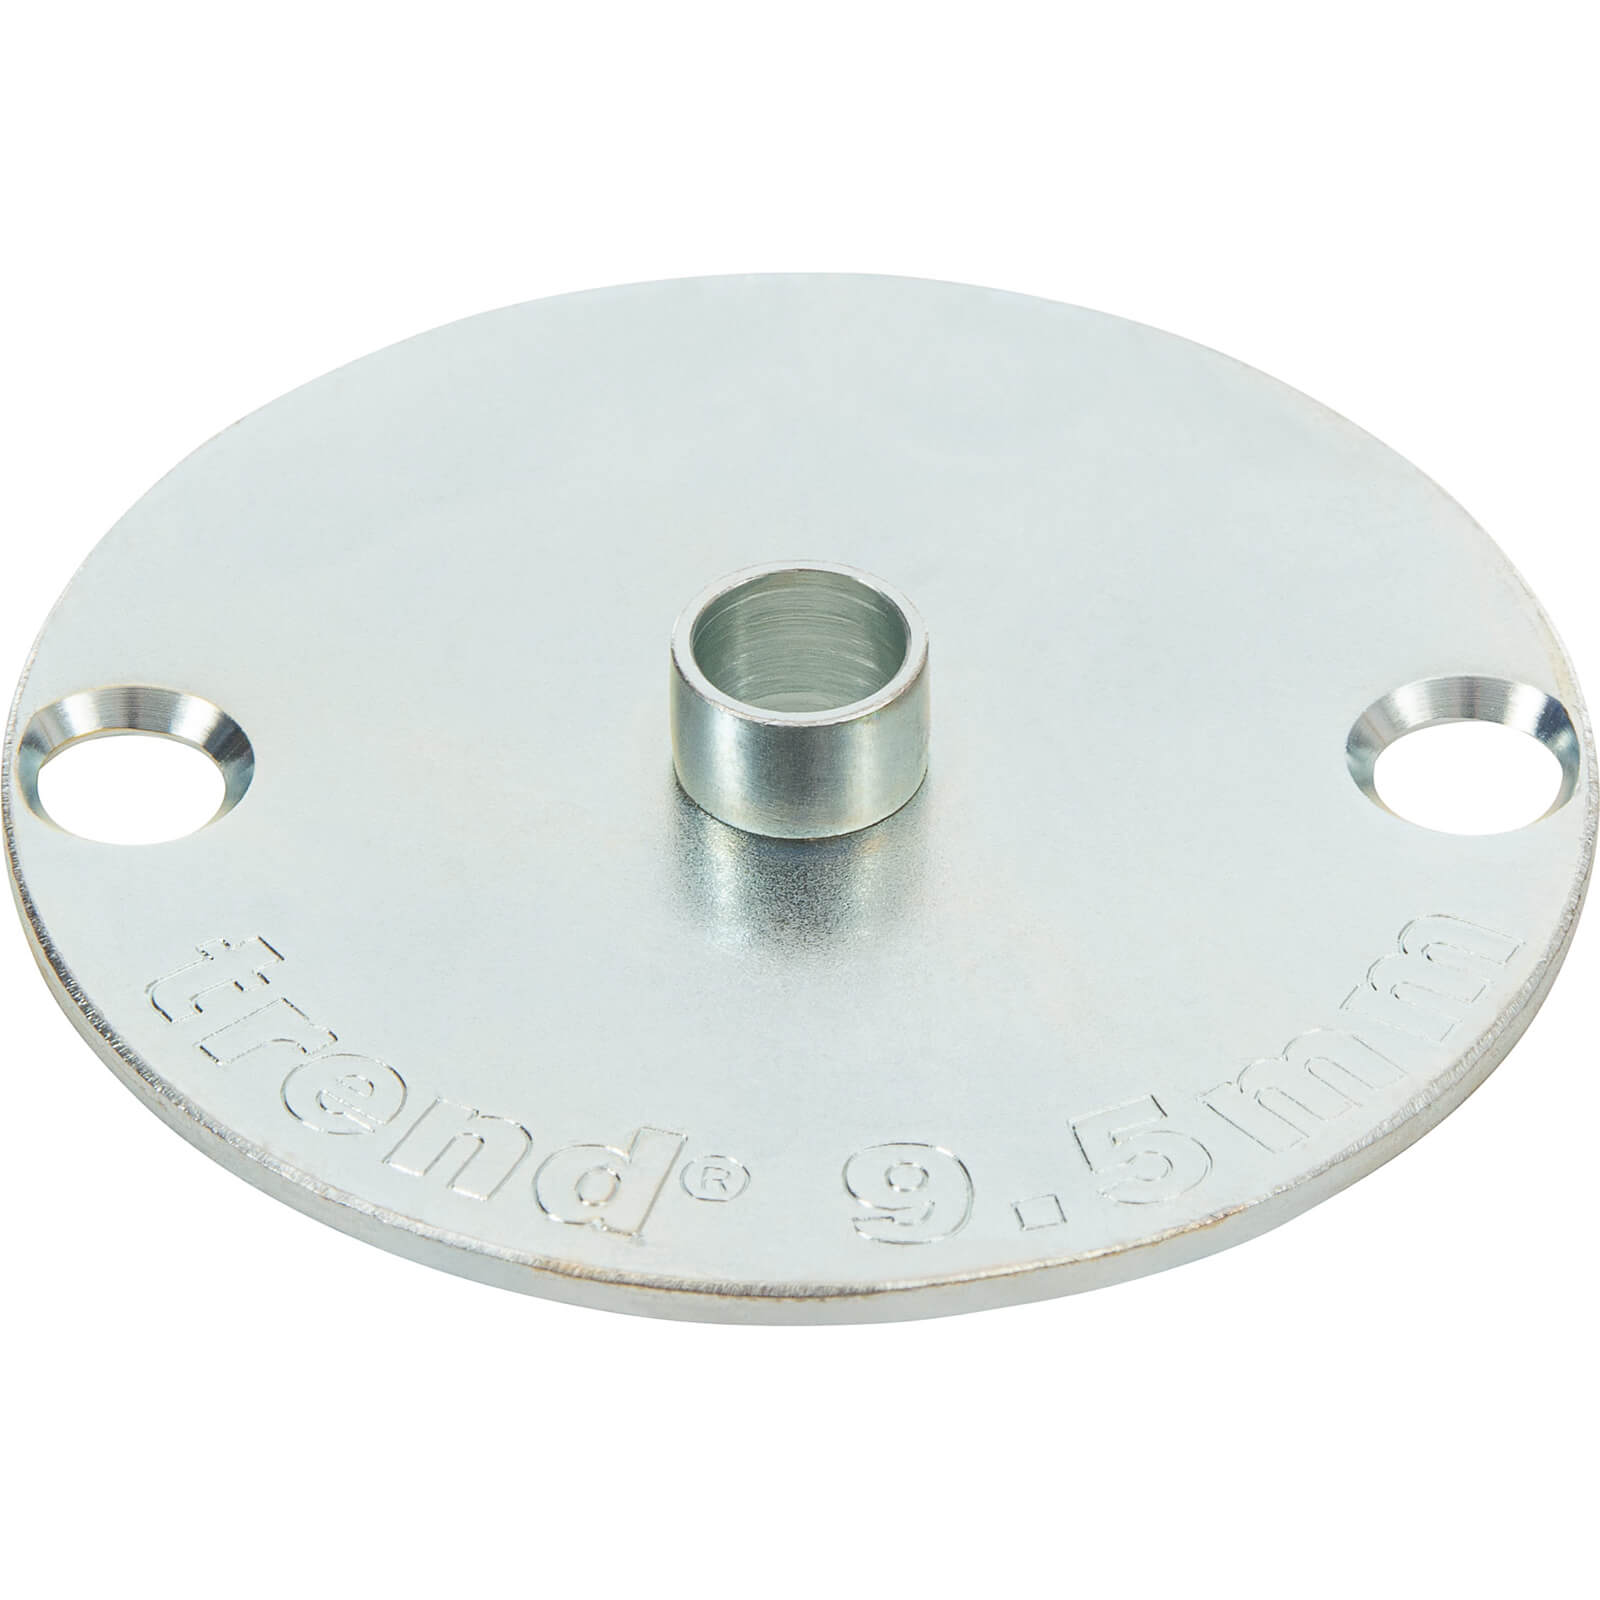 Image of Trend Universal Router Guide Bush 9.5mm